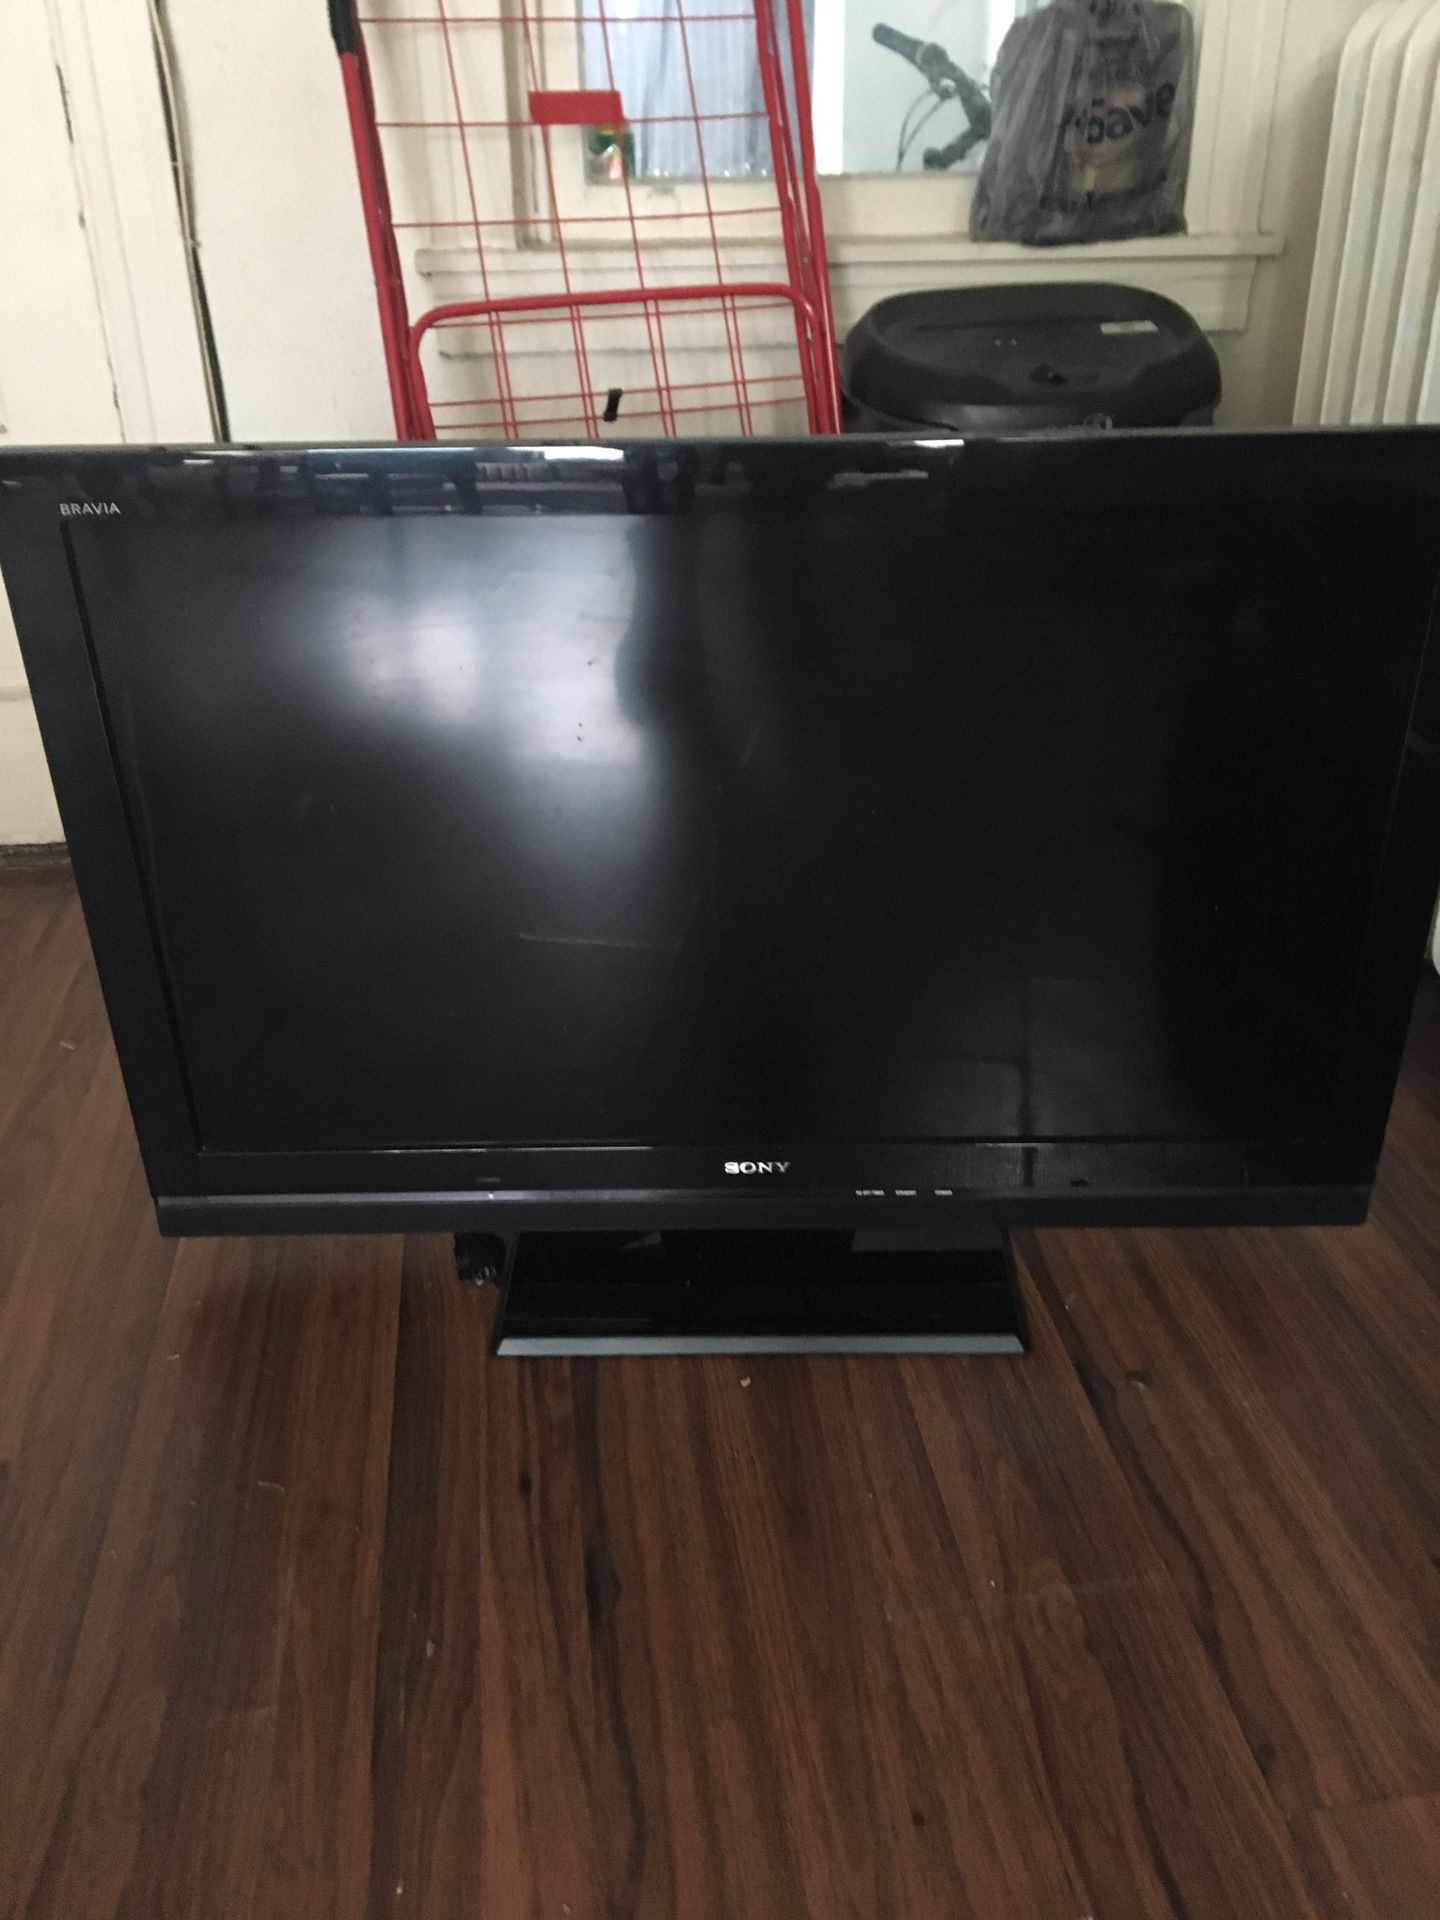 Fairly used 45 inch Sony flat screen comes with roku stick,Xbox 360/games and a play station 3 with games....everything works perfectly fine 